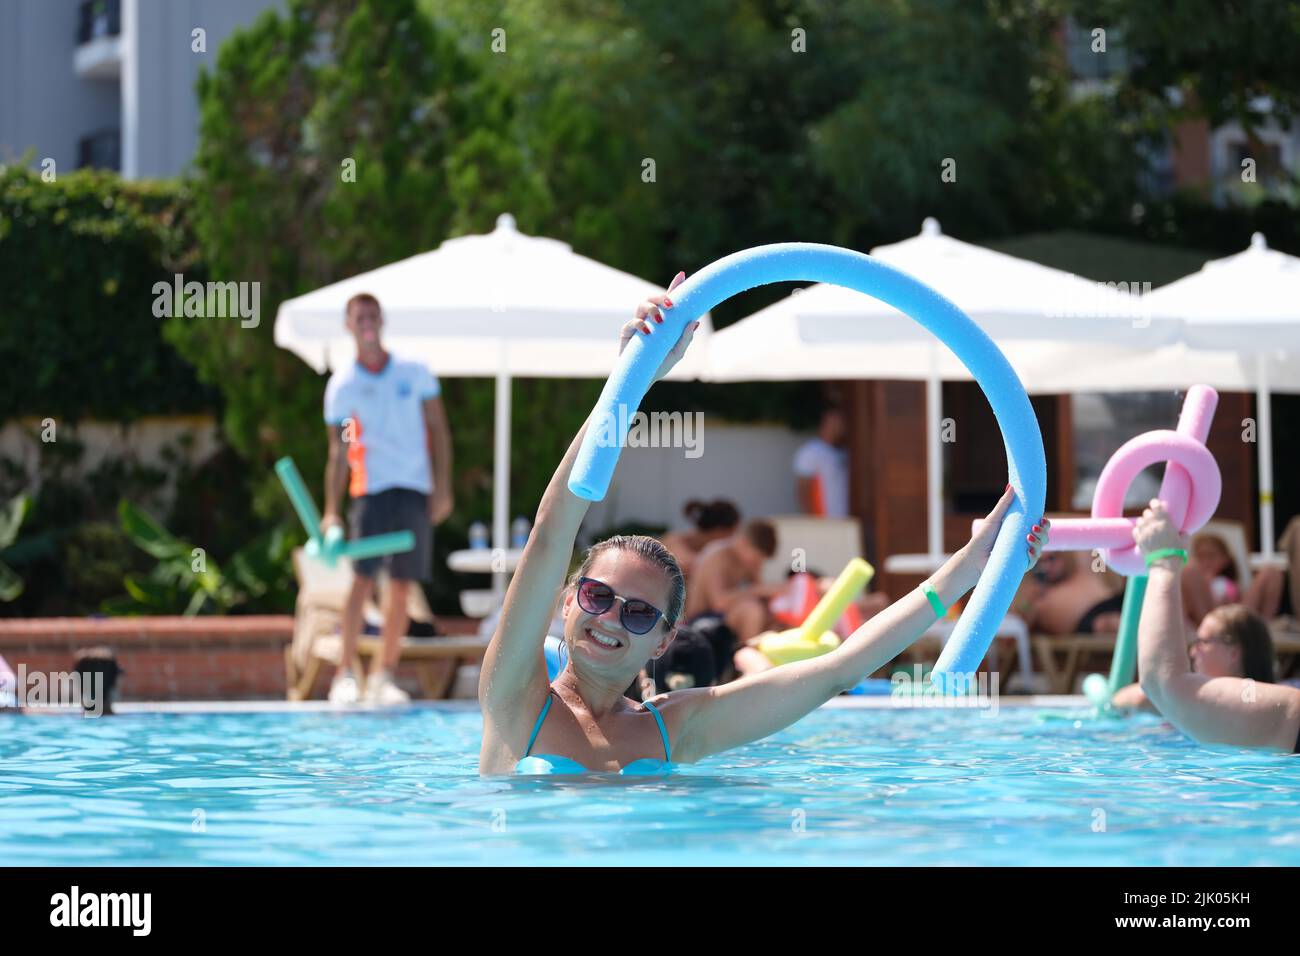 Attractive smiling woman in sunglasses using swimming noodles in pool Stock Photo